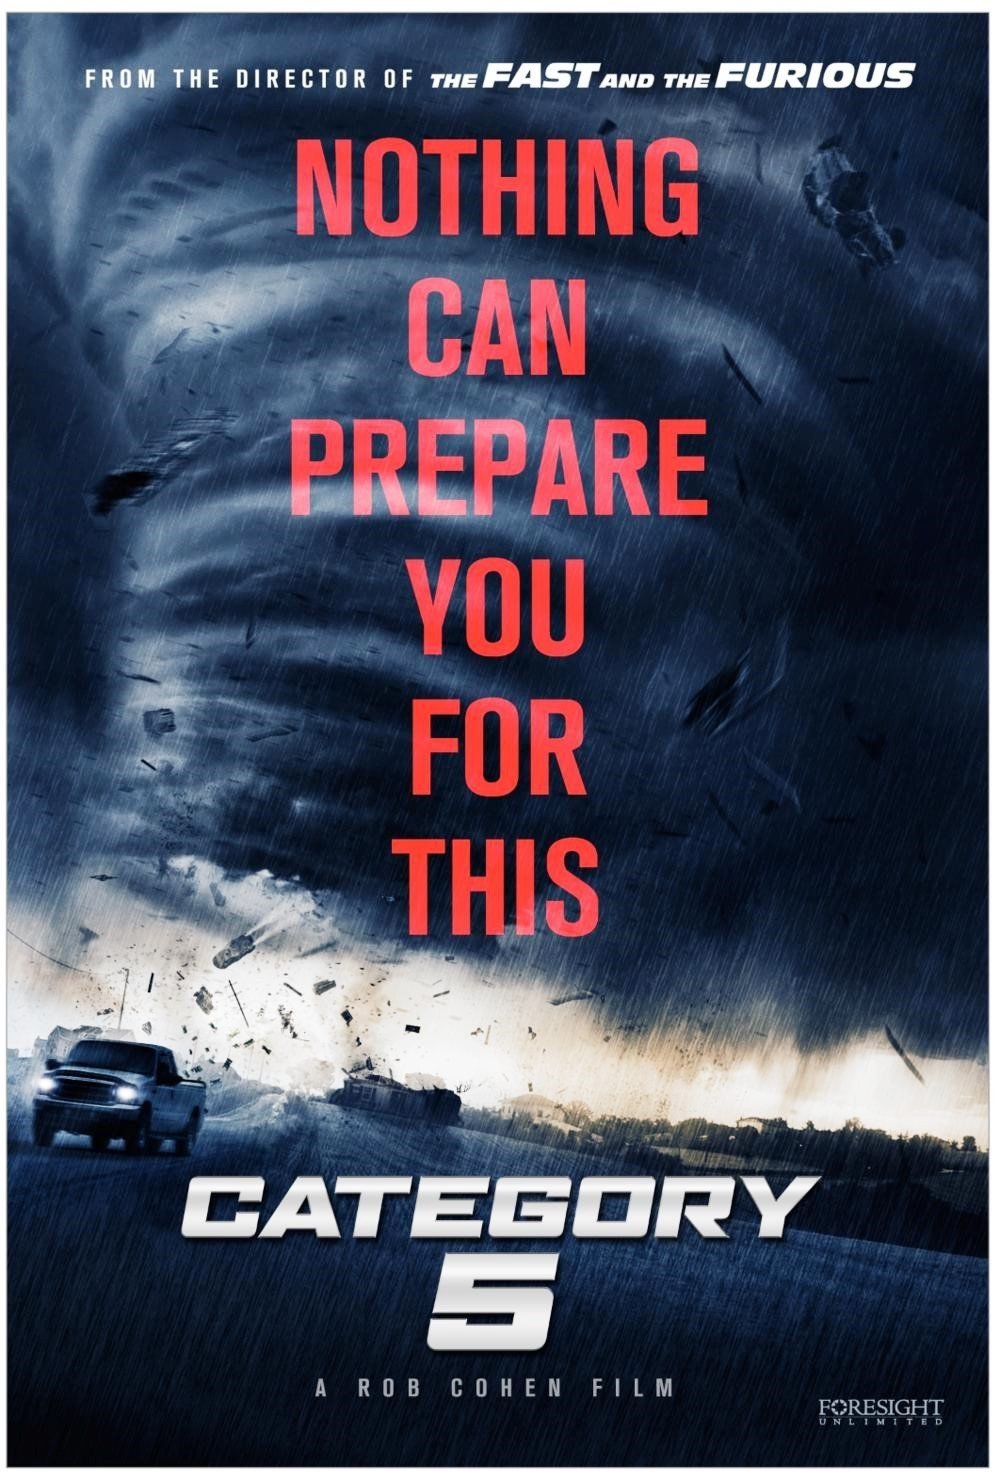 Poster of Entertainment Studios Motion Pictures' The Hurricane Heist (2018)